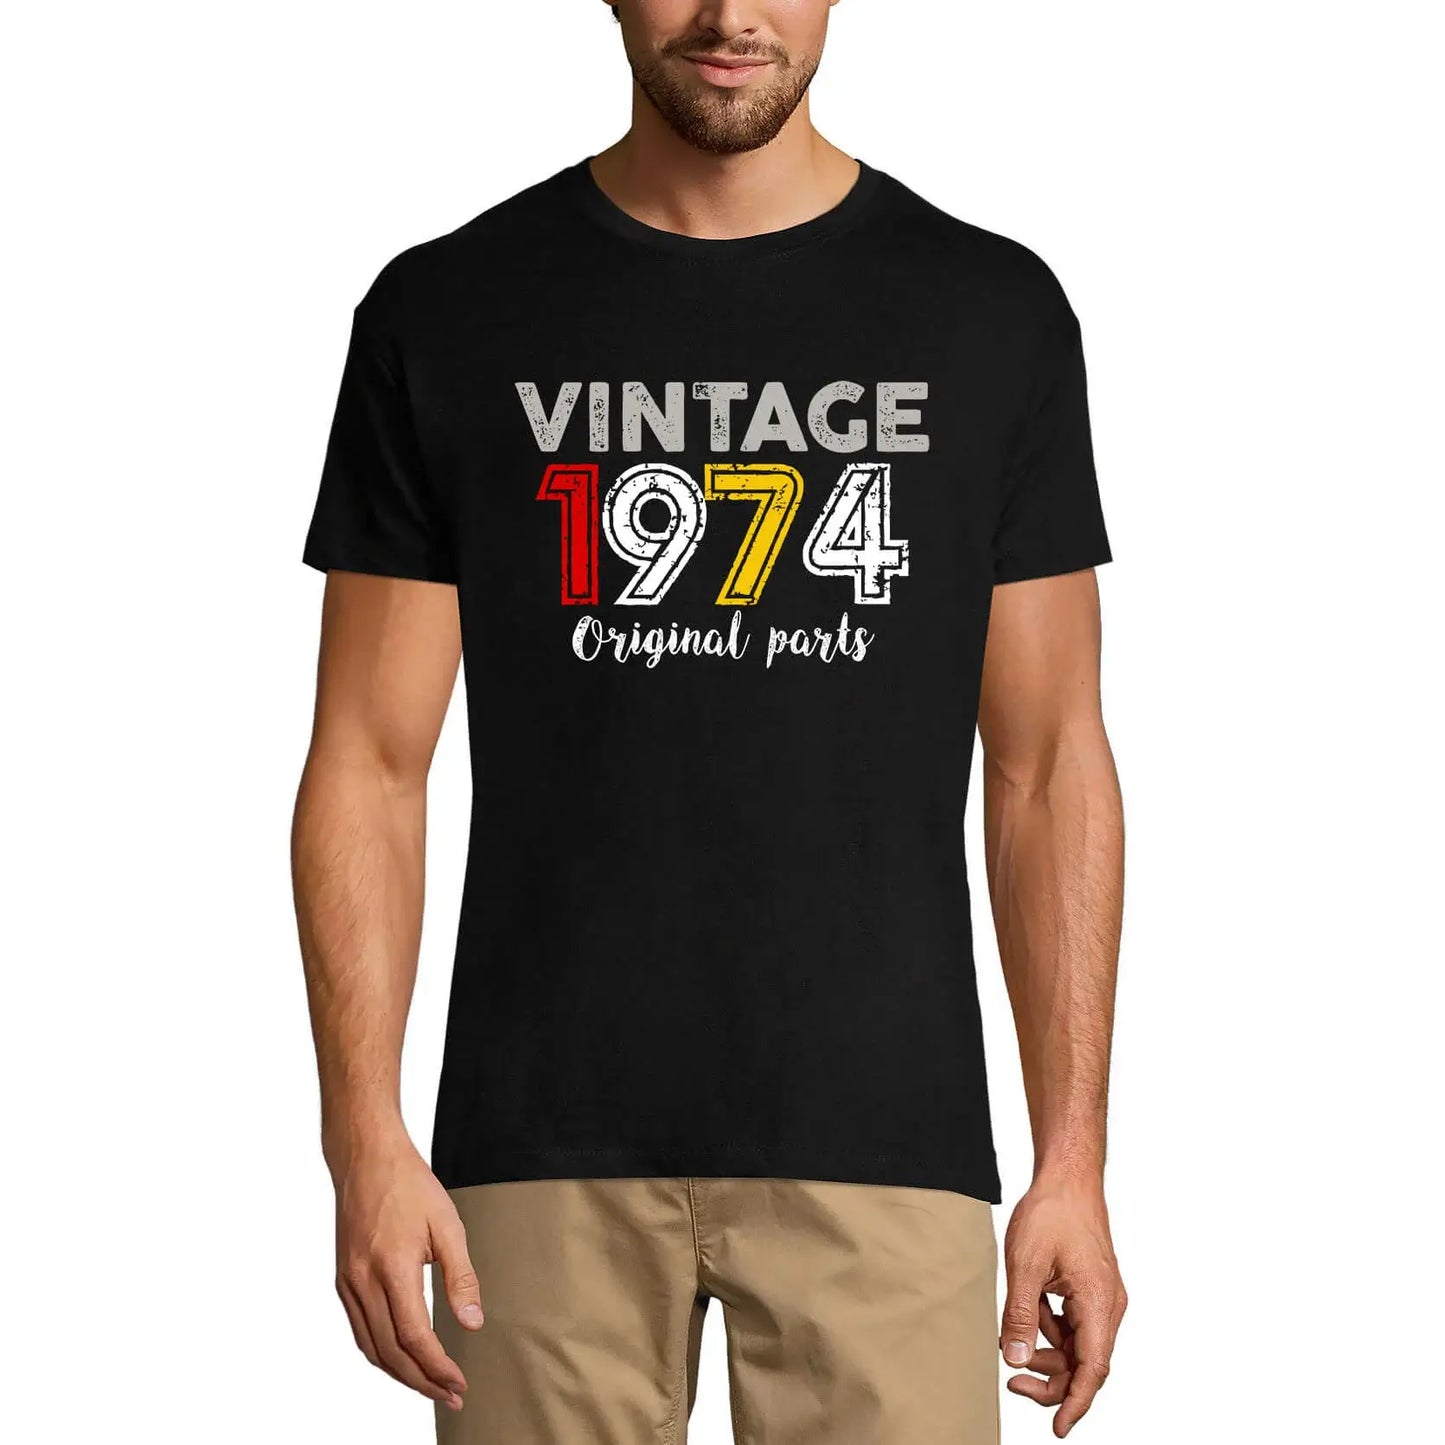 Men's Graphic T-Shirt Original Parts 1974 50th Birthday Anniversary 50 Year Old Gift 1974 Vintage Eco-Friendly Short Sleeve Novelty Tee